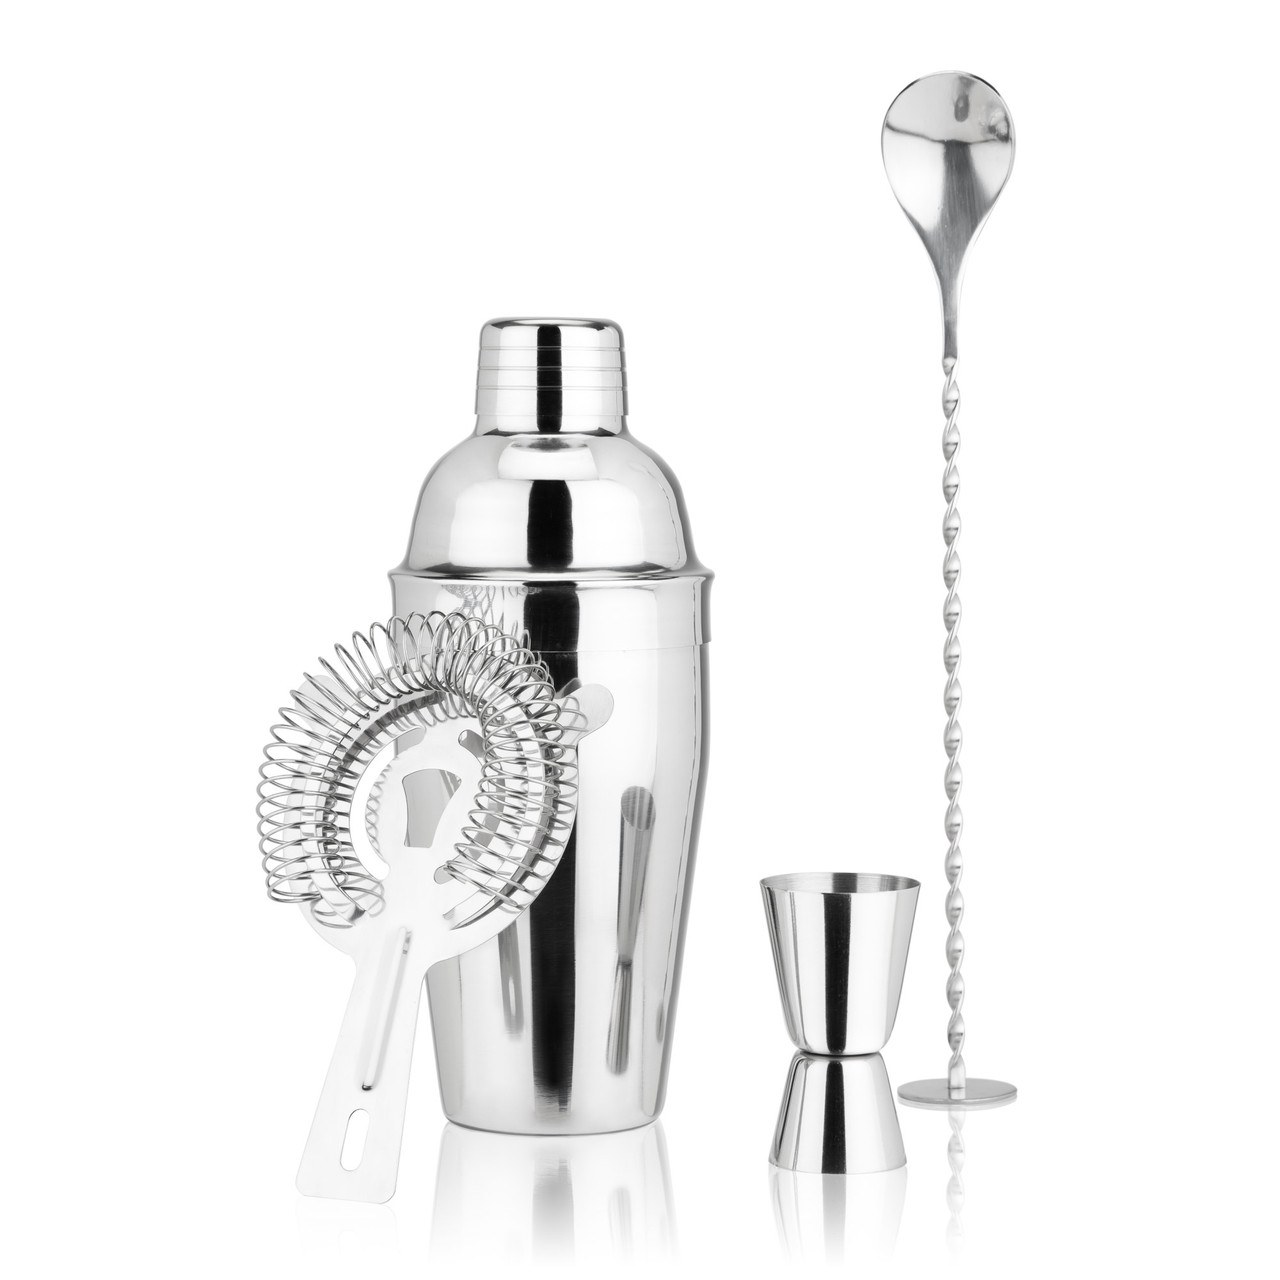 Fortify Stainless Steel Barware Set by True®